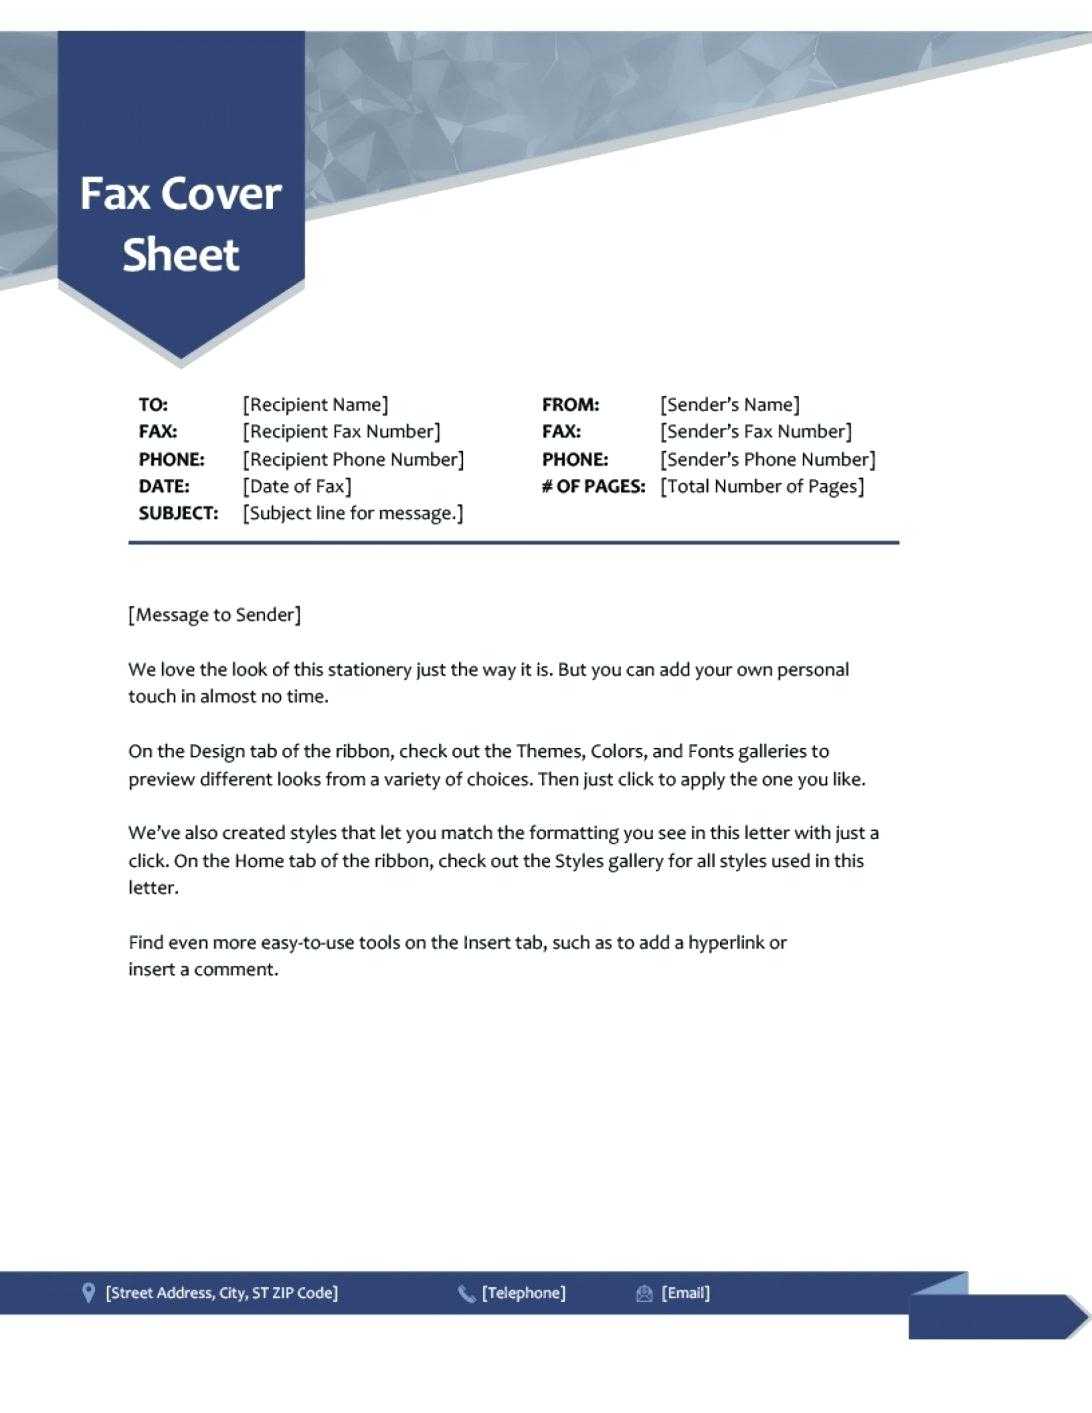 Resume Free Cover Letter Samples In Word Extraordinary With Fax Template Word 2010